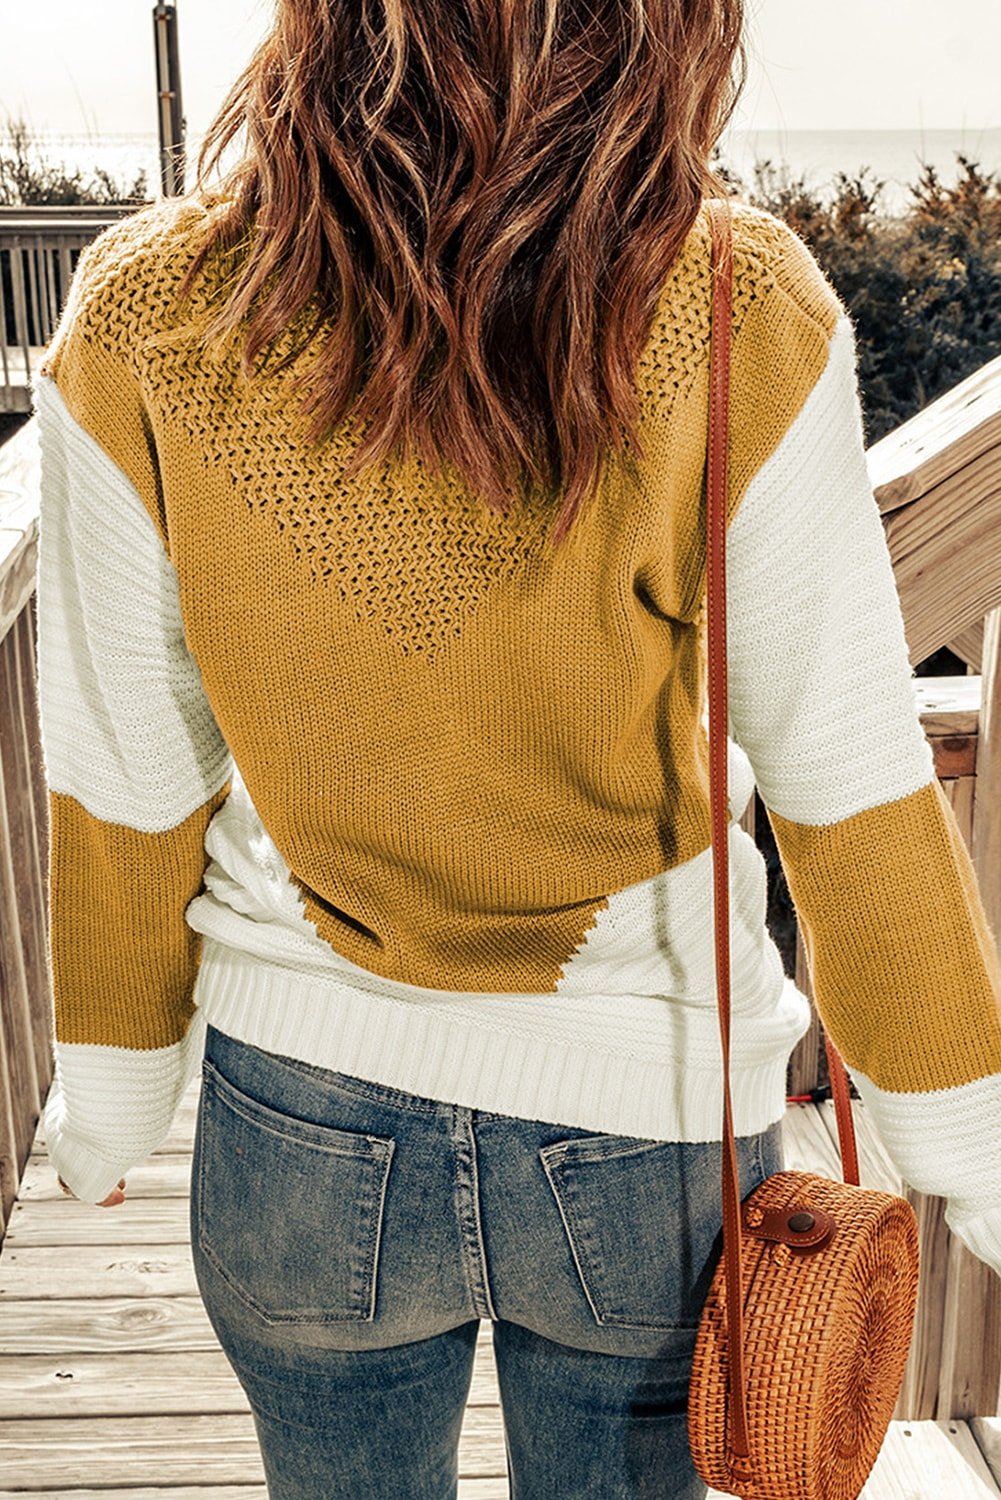 Two-Tone Openwork Rib-Knit Sweater  | KIKI COUTURE-Women's Clothing, Designer Fashions, Shoes, Bags